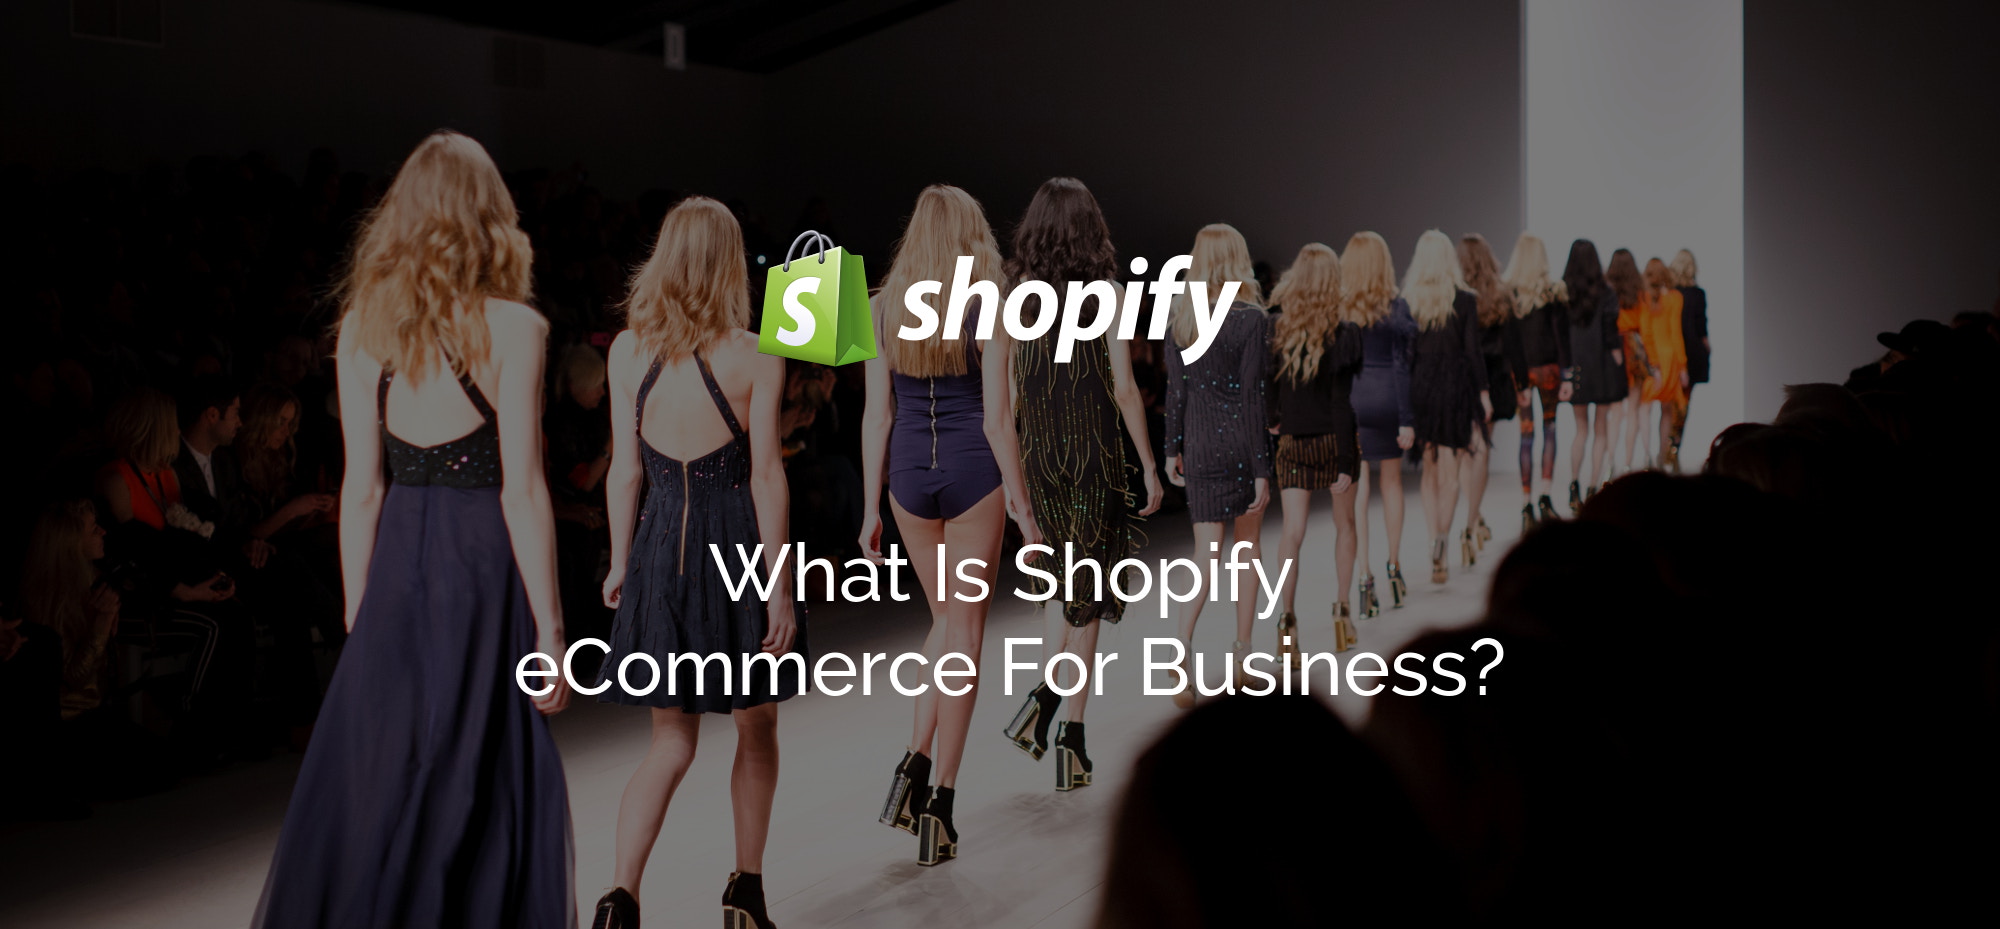 What Is Shopify eCommerce For Business fashion image with shopifiy logo